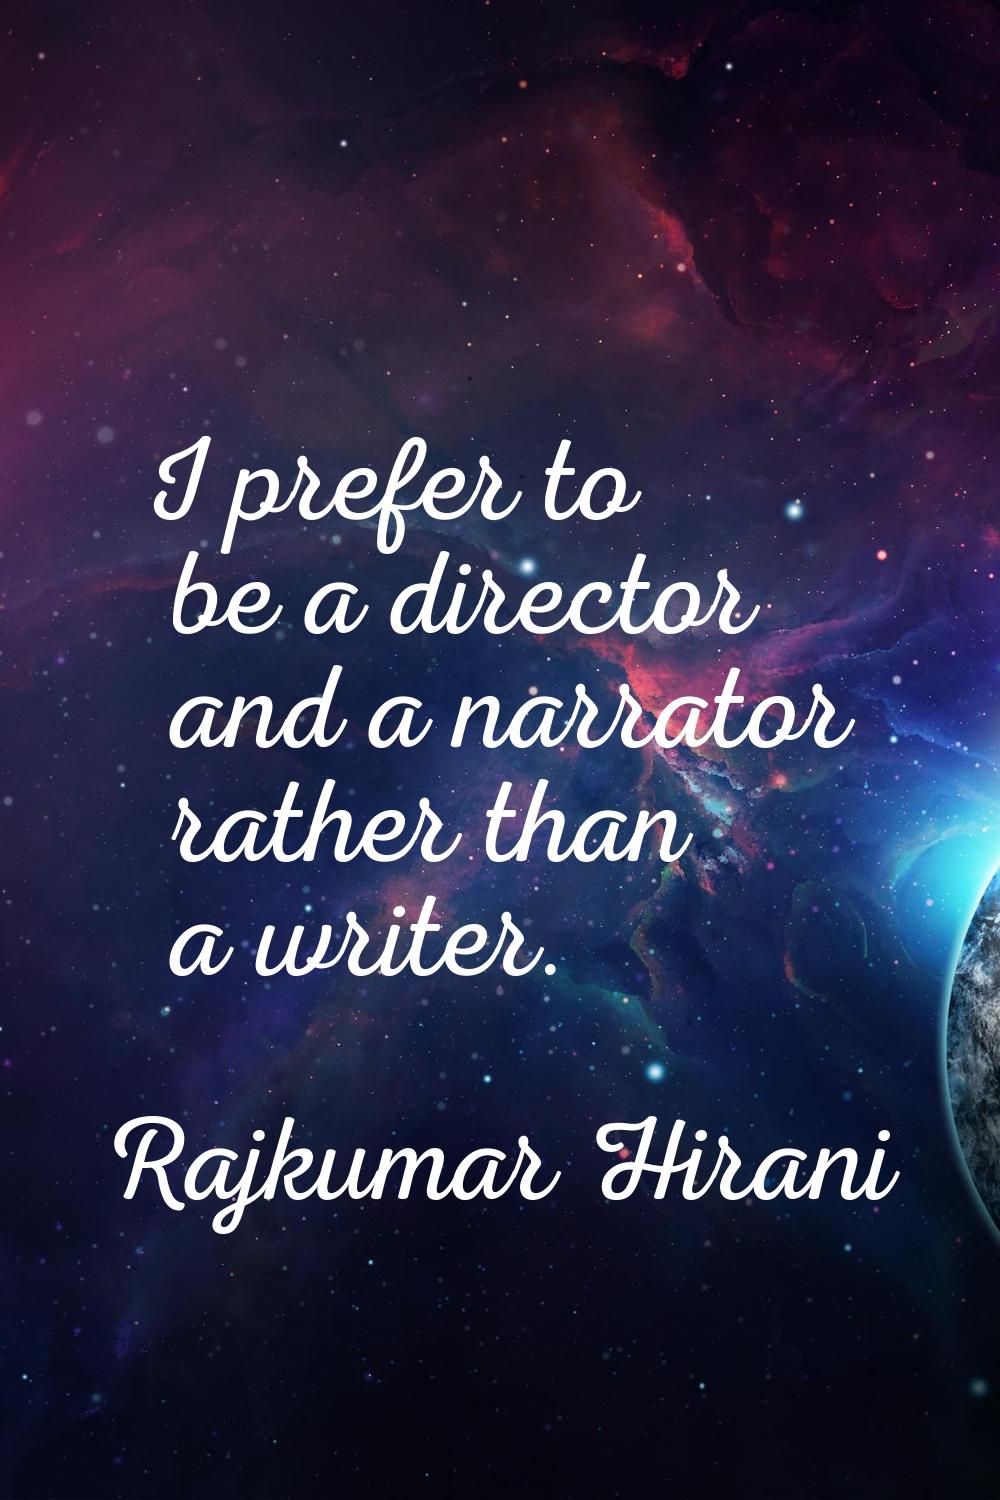 I prefer to be a director and a narrator rather than a writer.